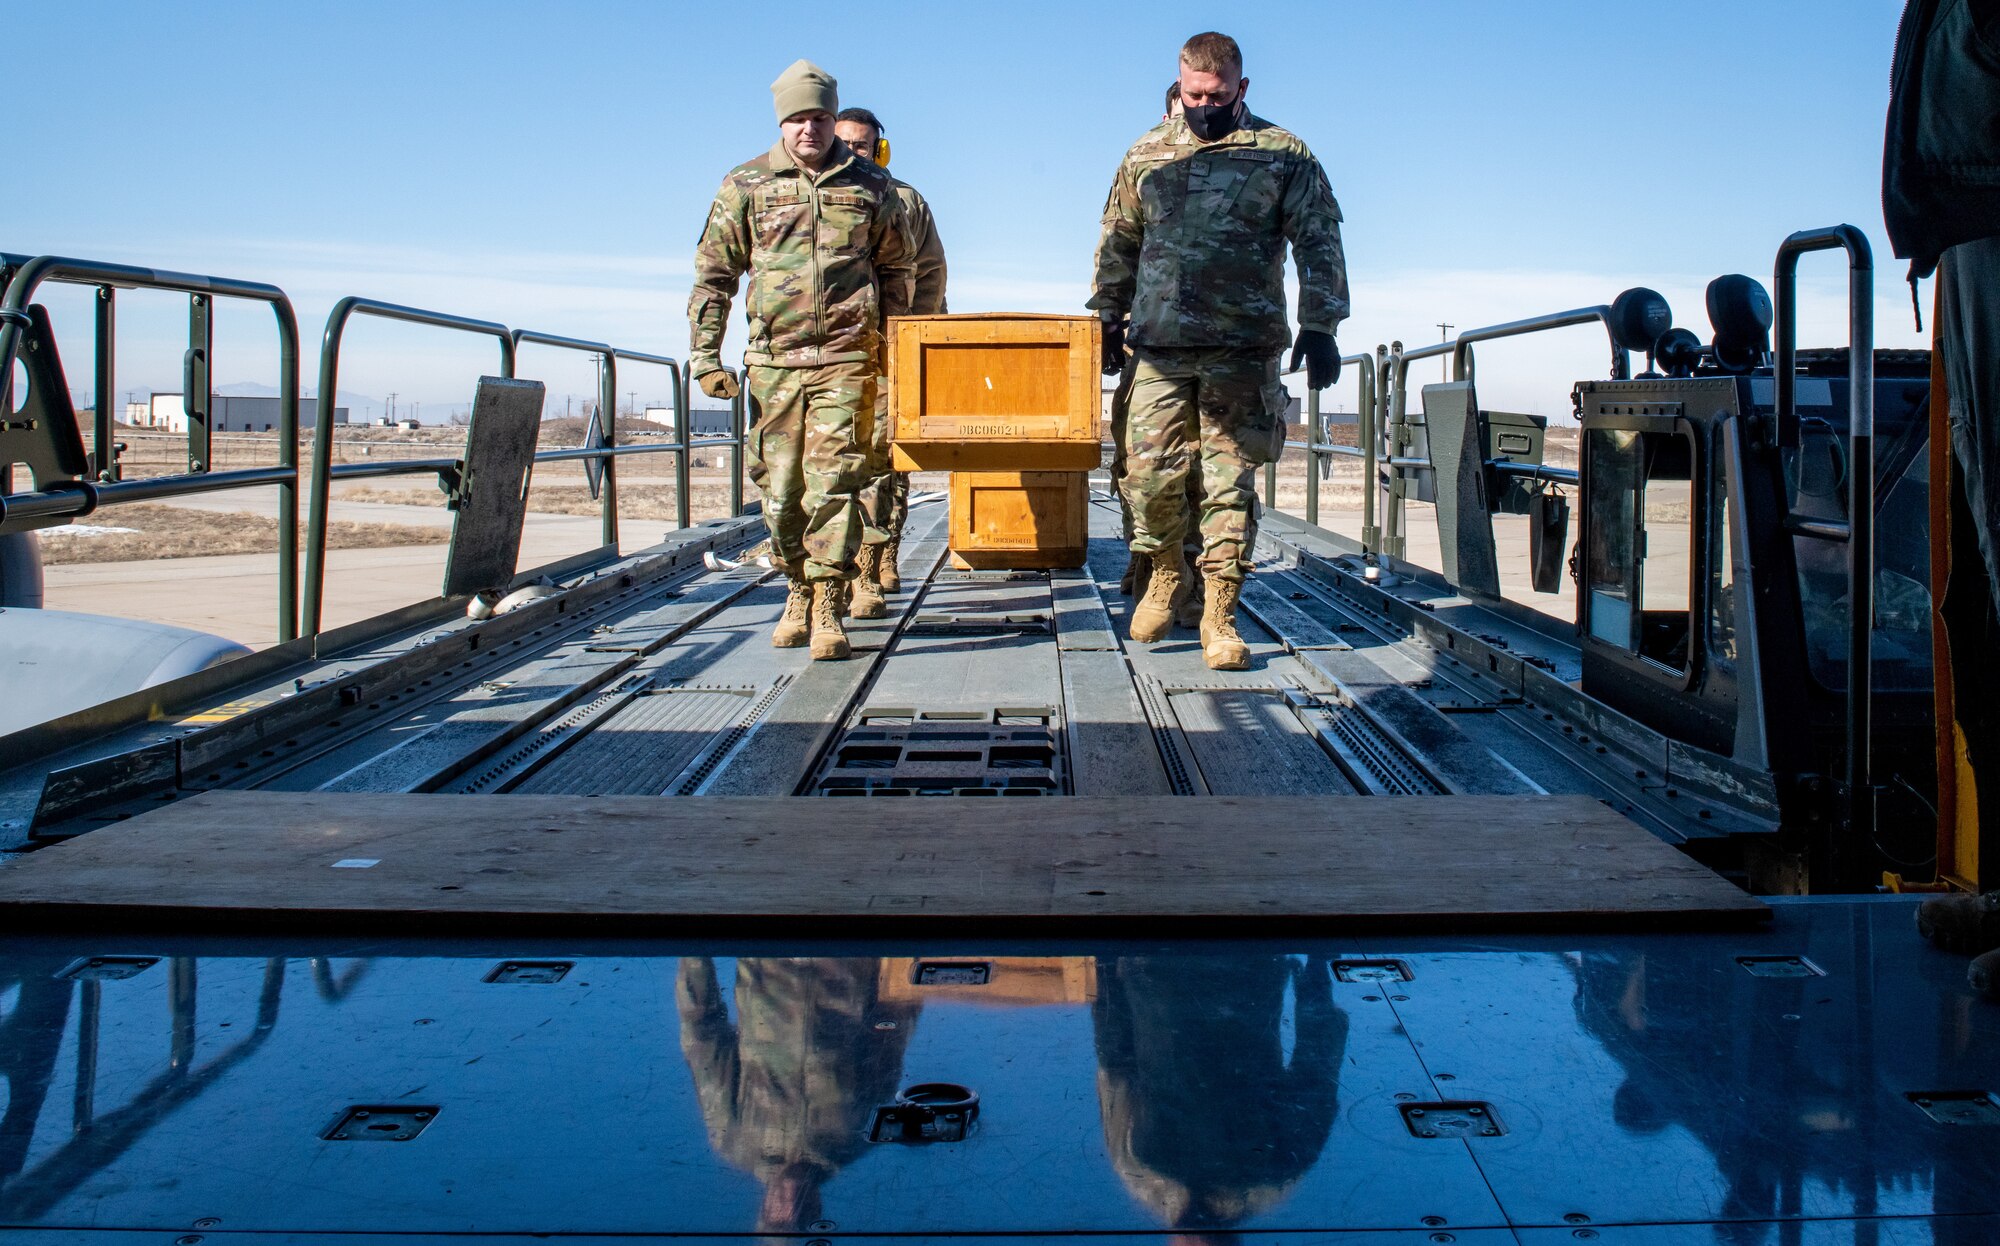 Air Force reservists from the 67th Aerial Port Squadron carry an empty casket box onto a KC-135 as part of a cargo loading exercise Feb. 5, 2022 at Hill Air Force Base, Utah